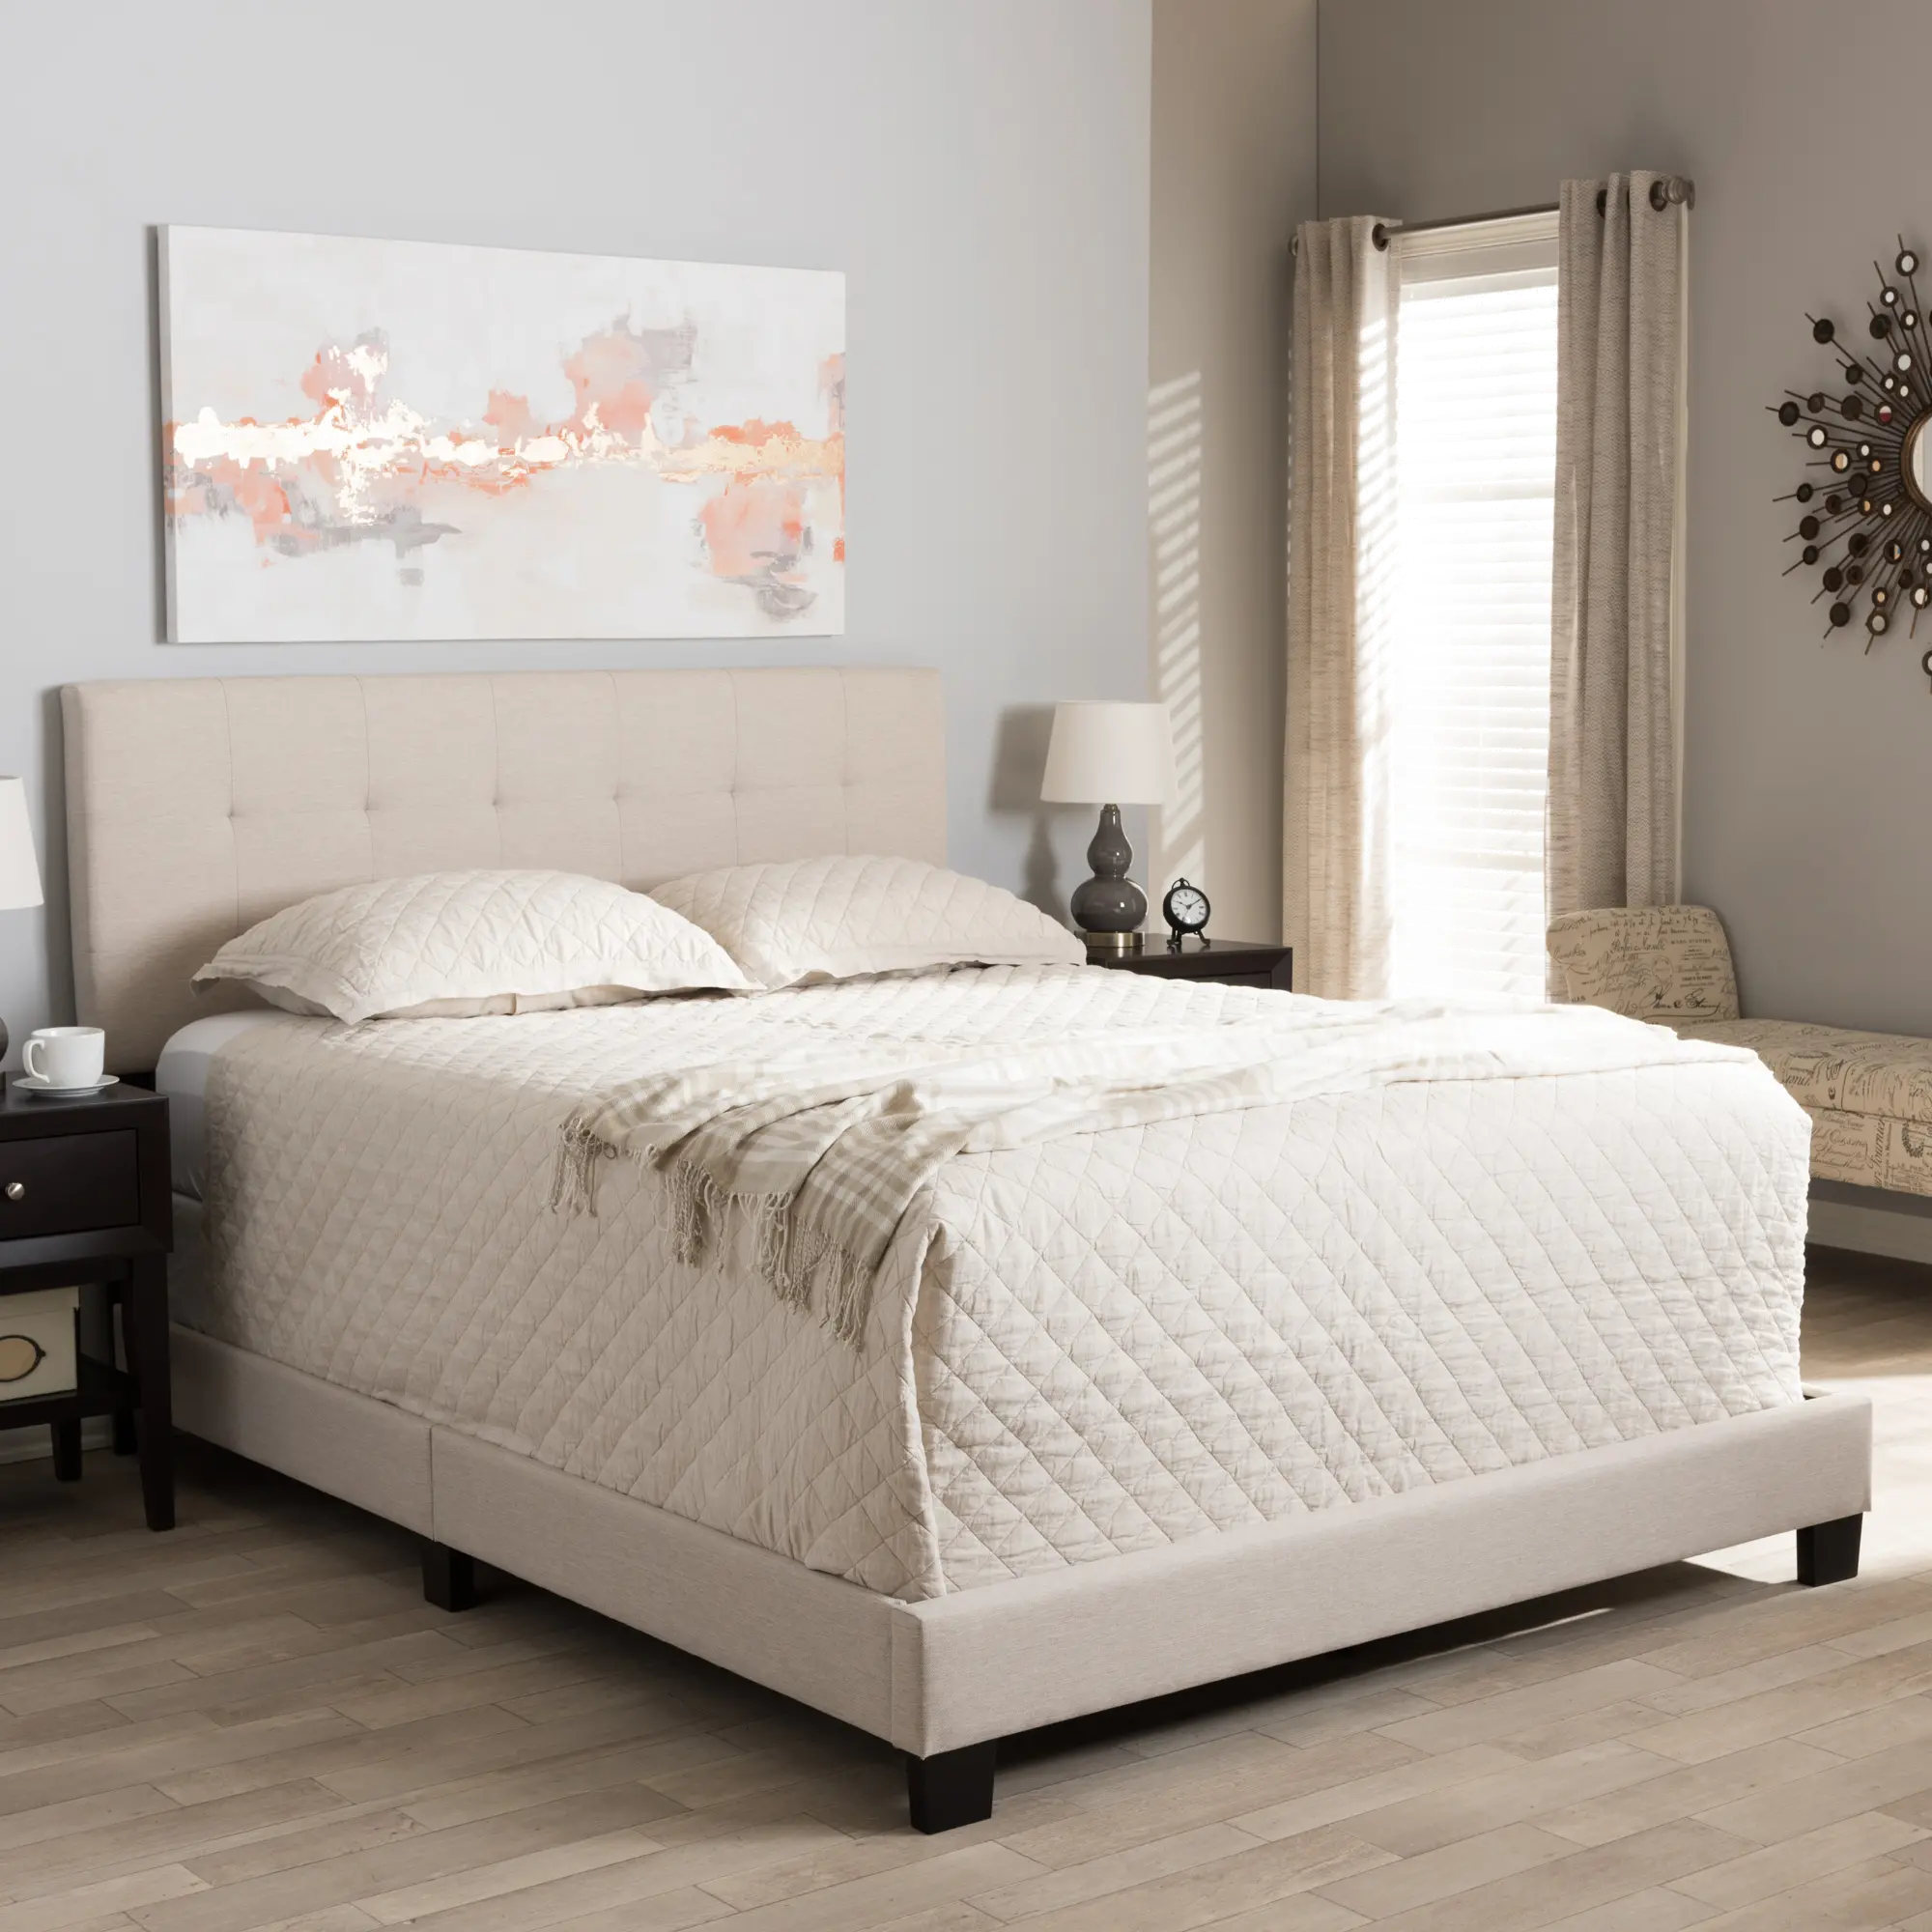 131-7313-RCW Contemporary Beige Full Upholstered Bed - Brookfie sku 131-7313-RCW